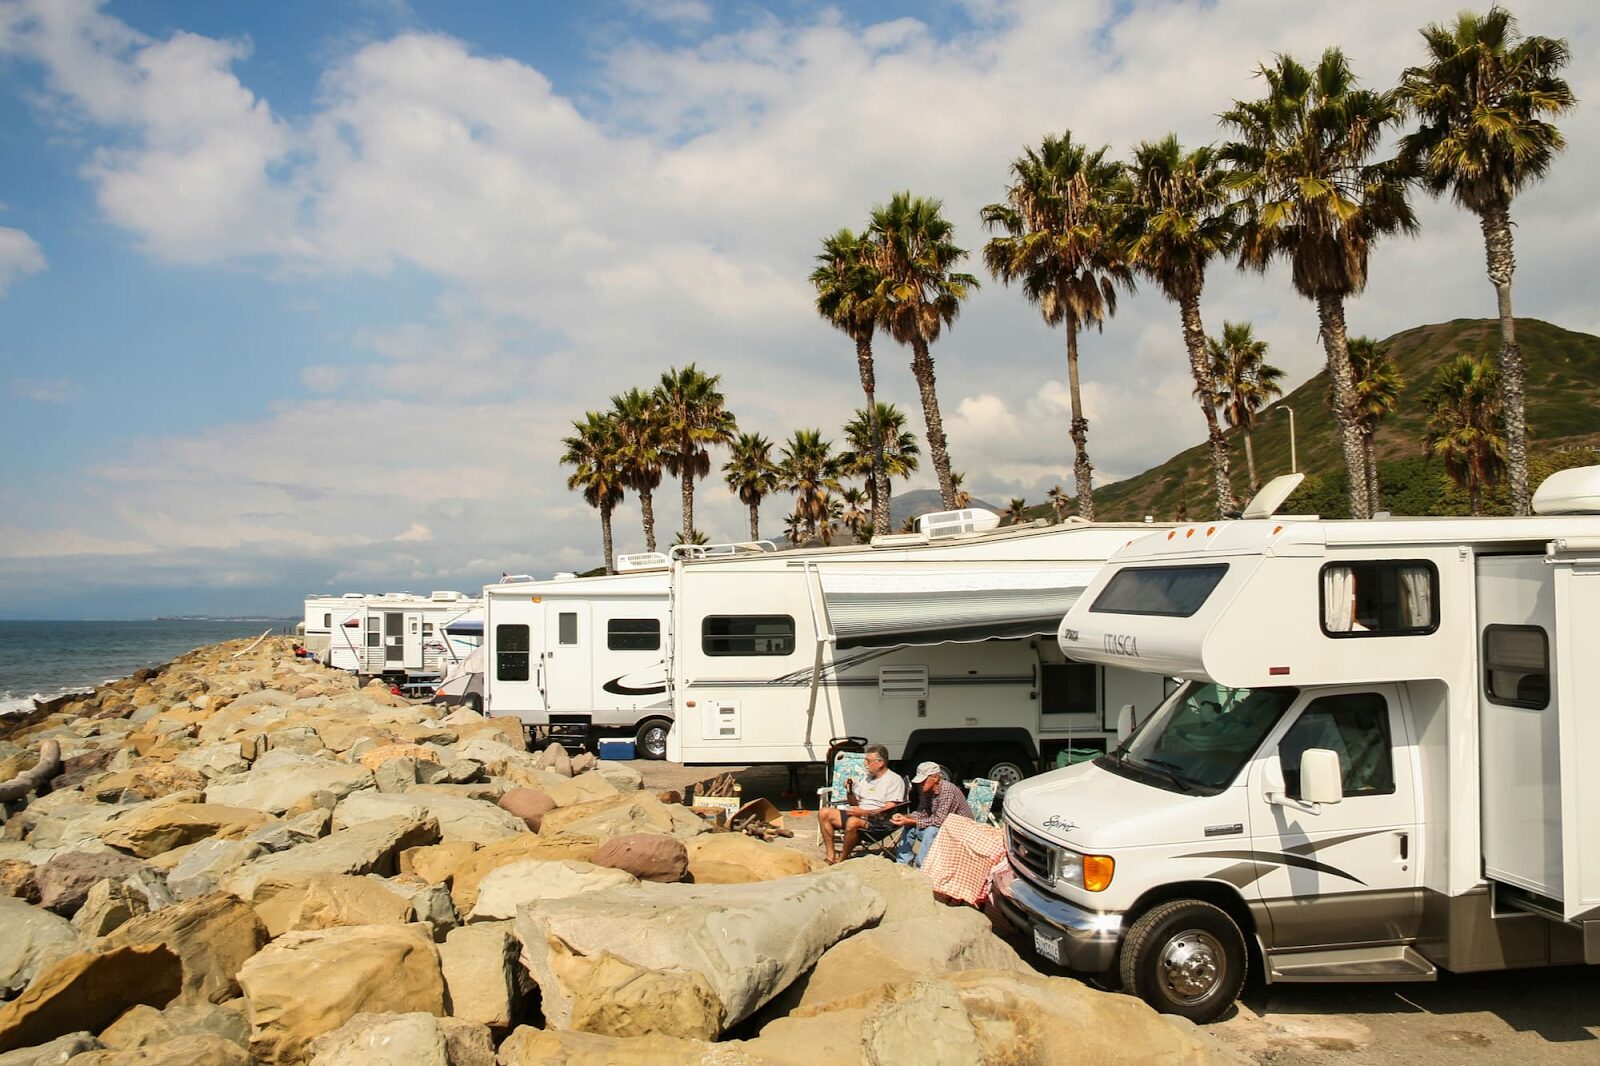 RVs parked along the ocean with palm trees - snowbird rental